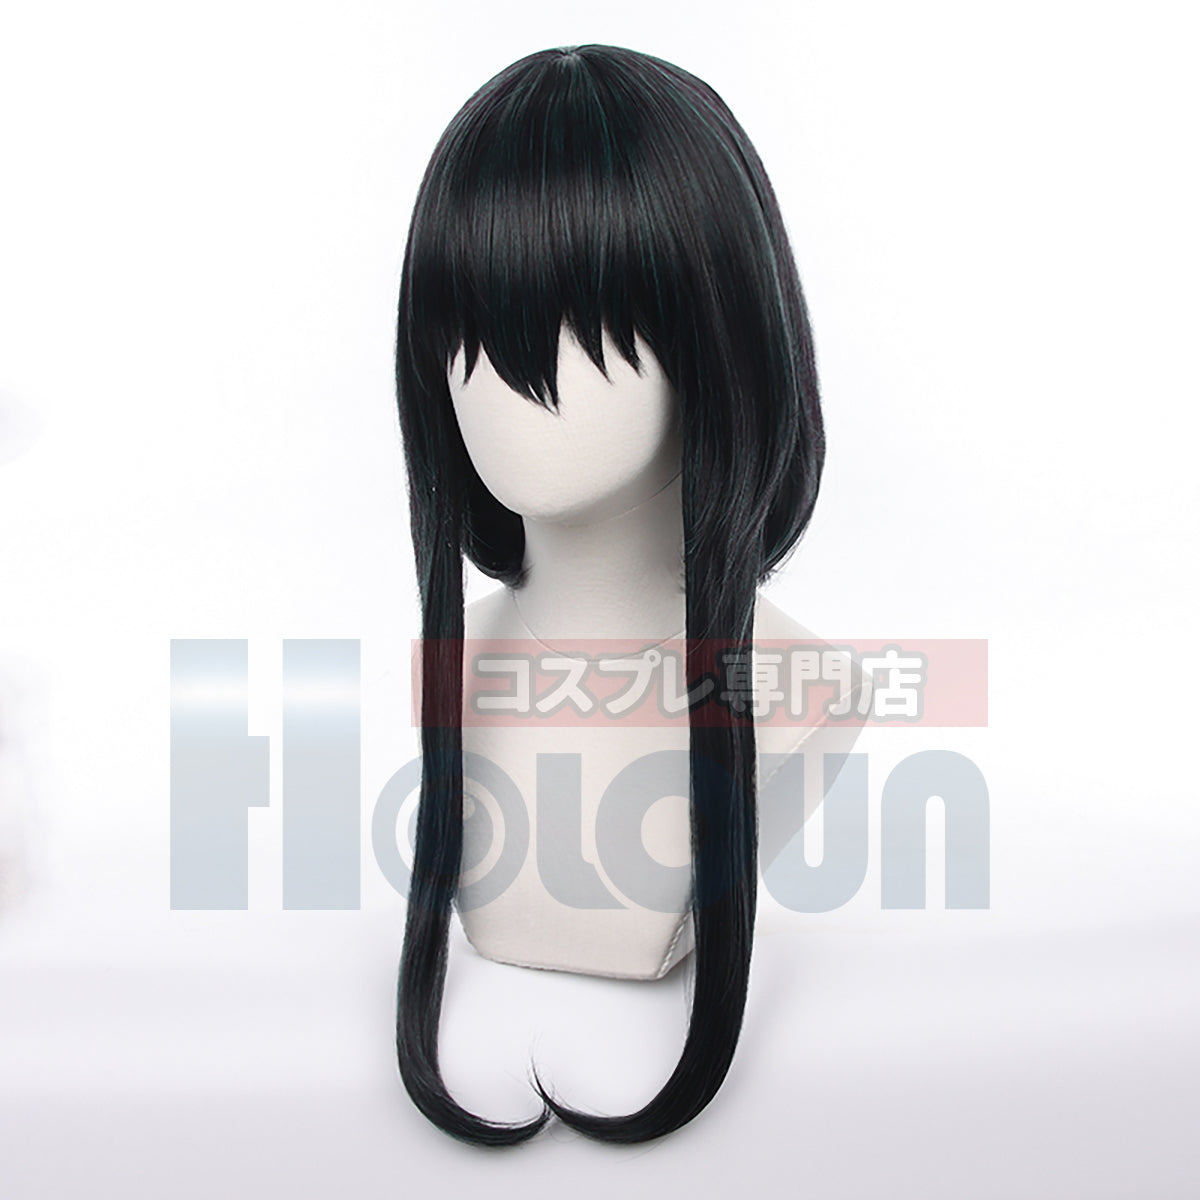 HOLOUN Spy Anime Cosplay Yor Forger Loid Forger Anya Forger Universal Wig Fake Hair Halloween Christmas Party Dress Up Nets Comb Hairpin New